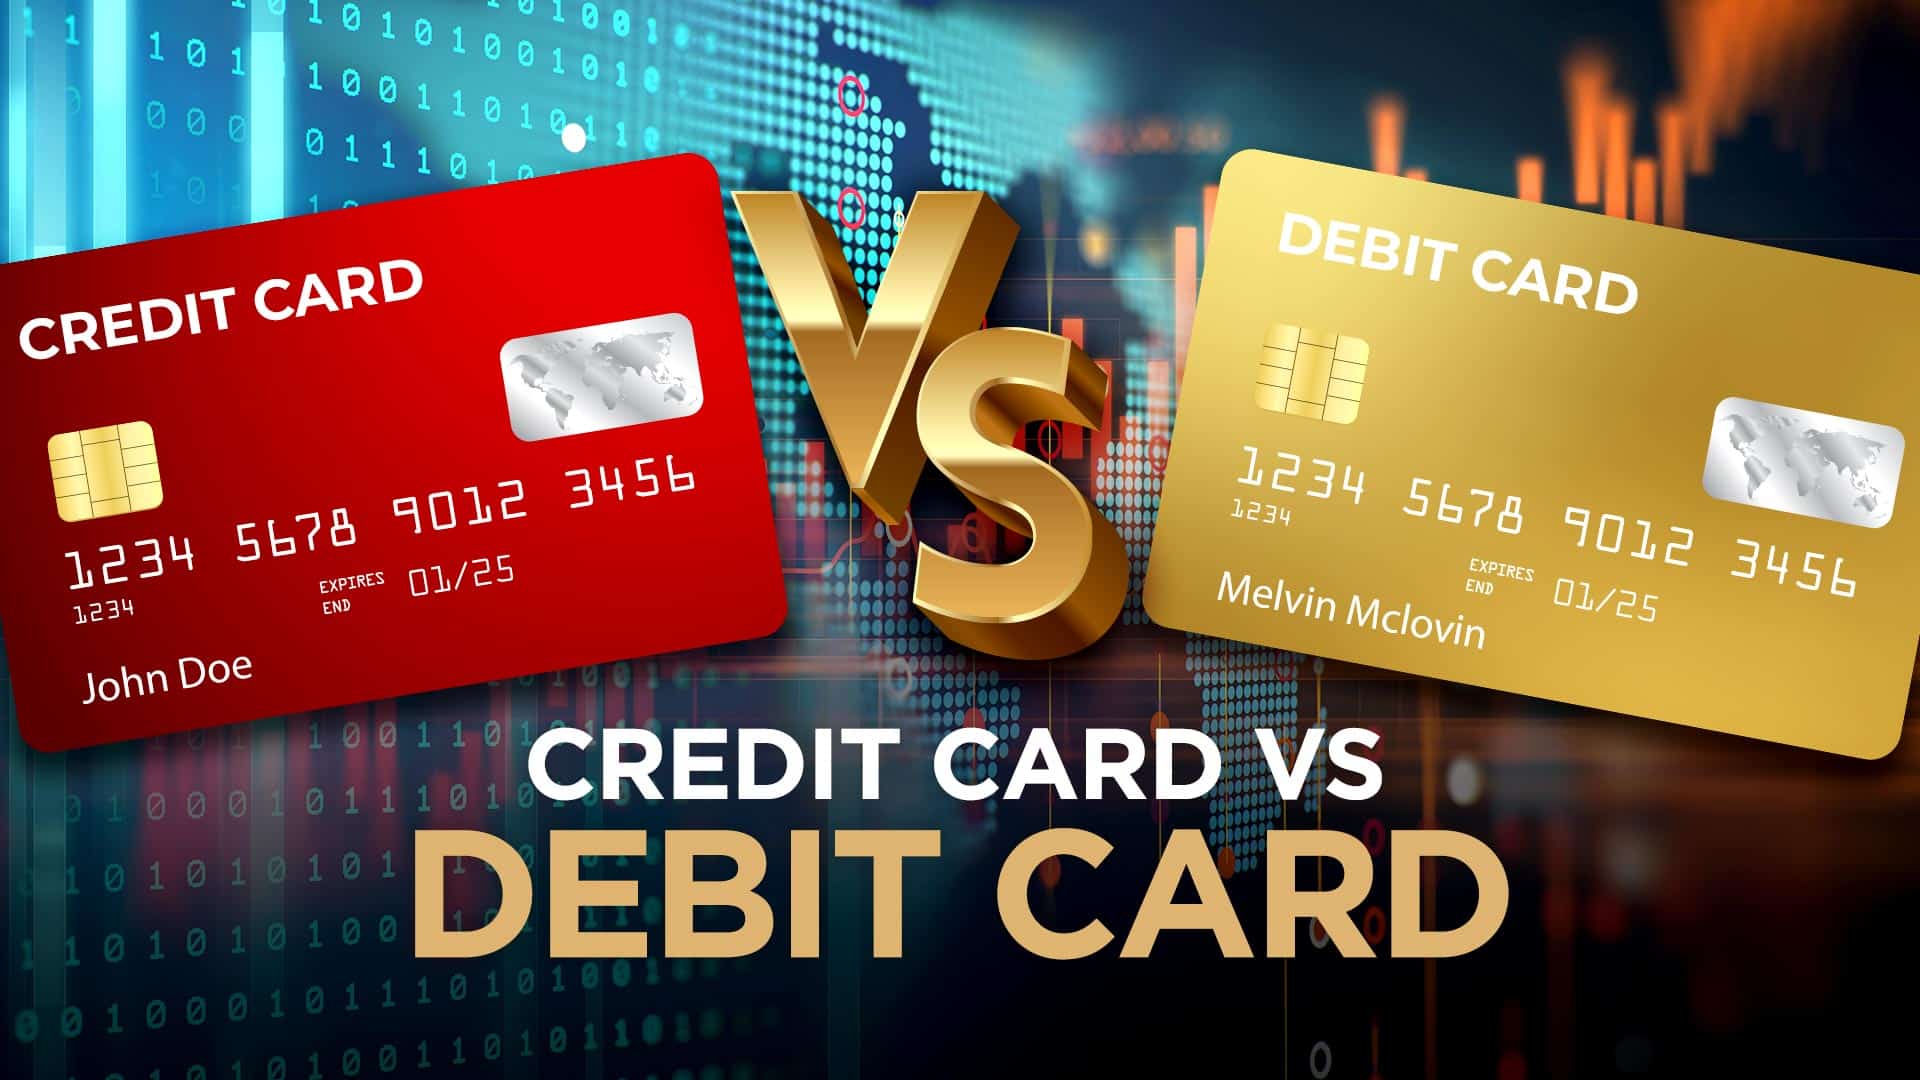 debit card vs credit card which is better